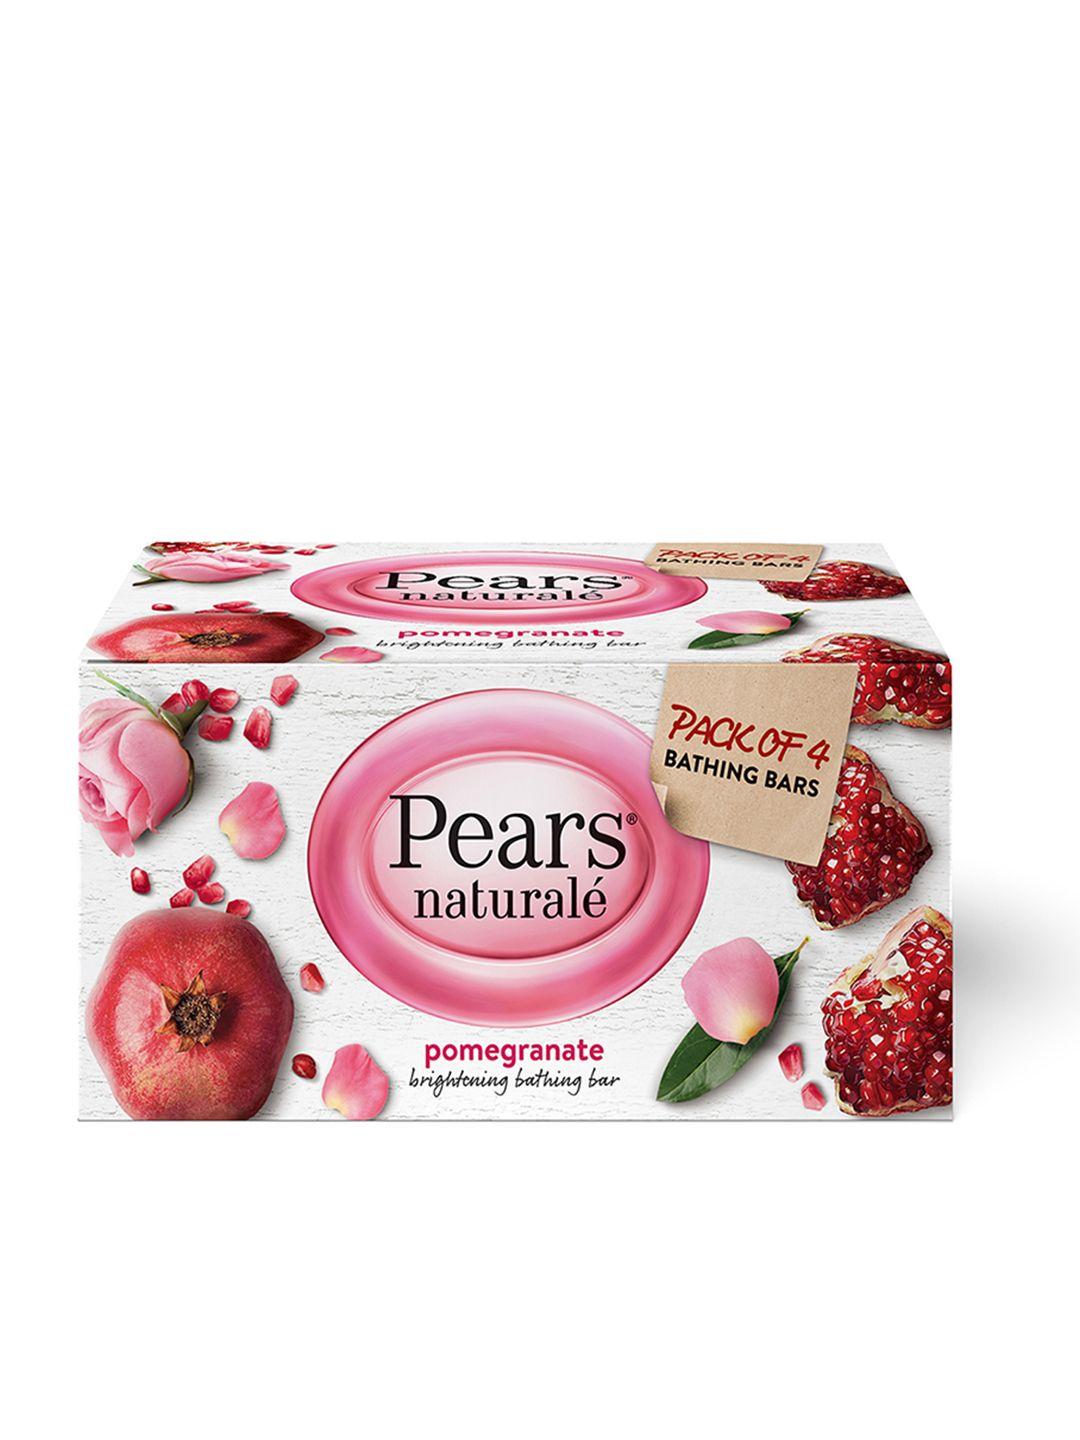 pears naturale set of 4 pomegranate brightening bathing soap bars 125 gm each